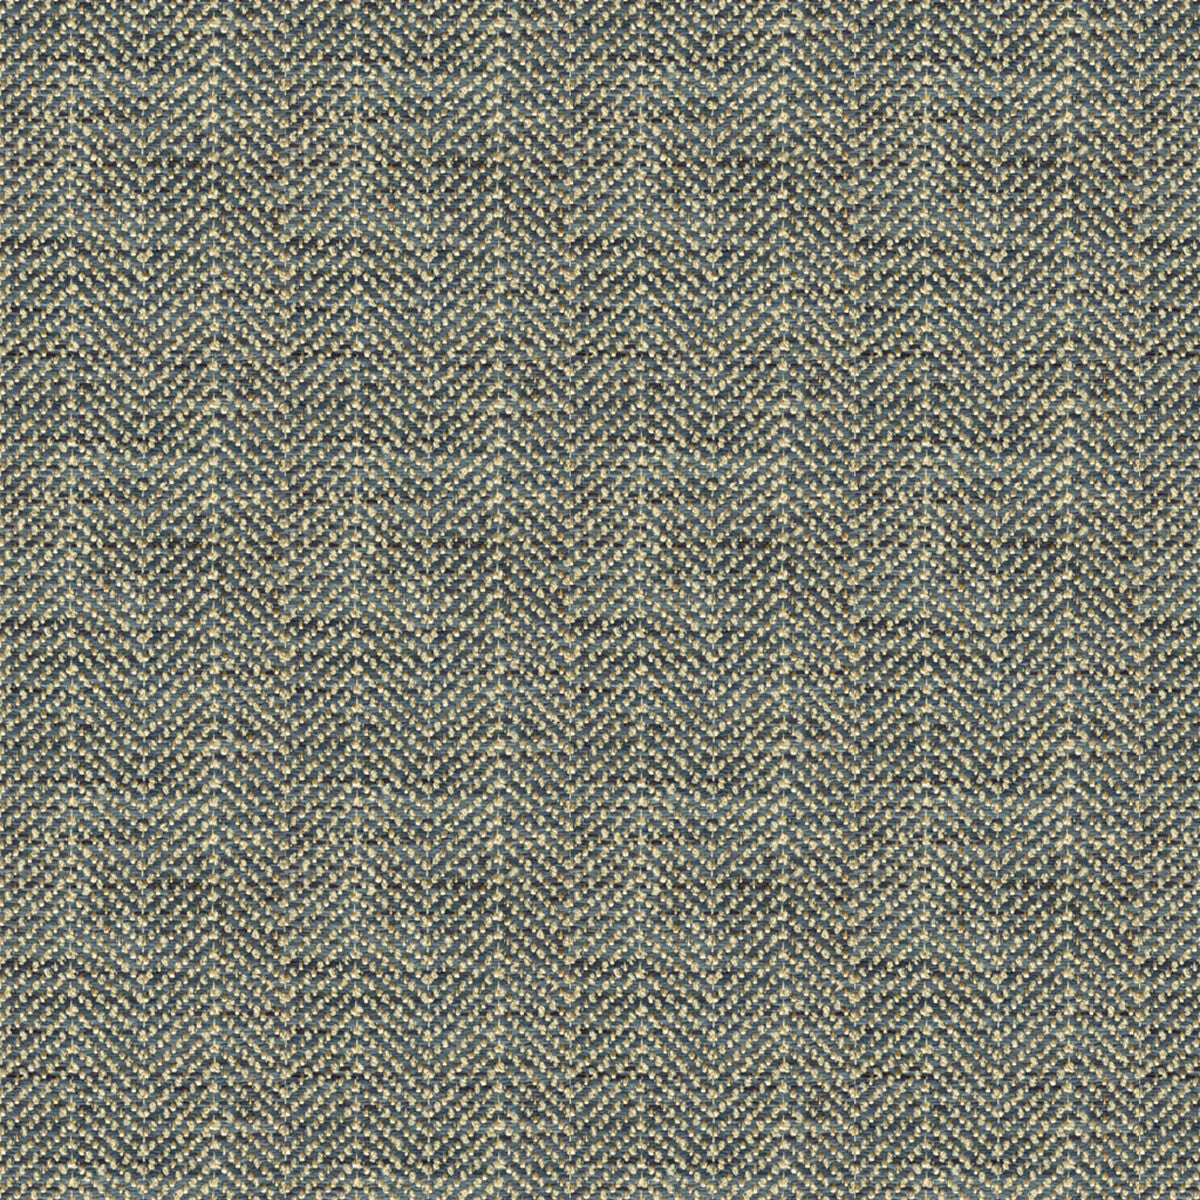 Kravet Contract fabric in 32018-516 color - pattern 32018.516.0 - by Kravet Contract